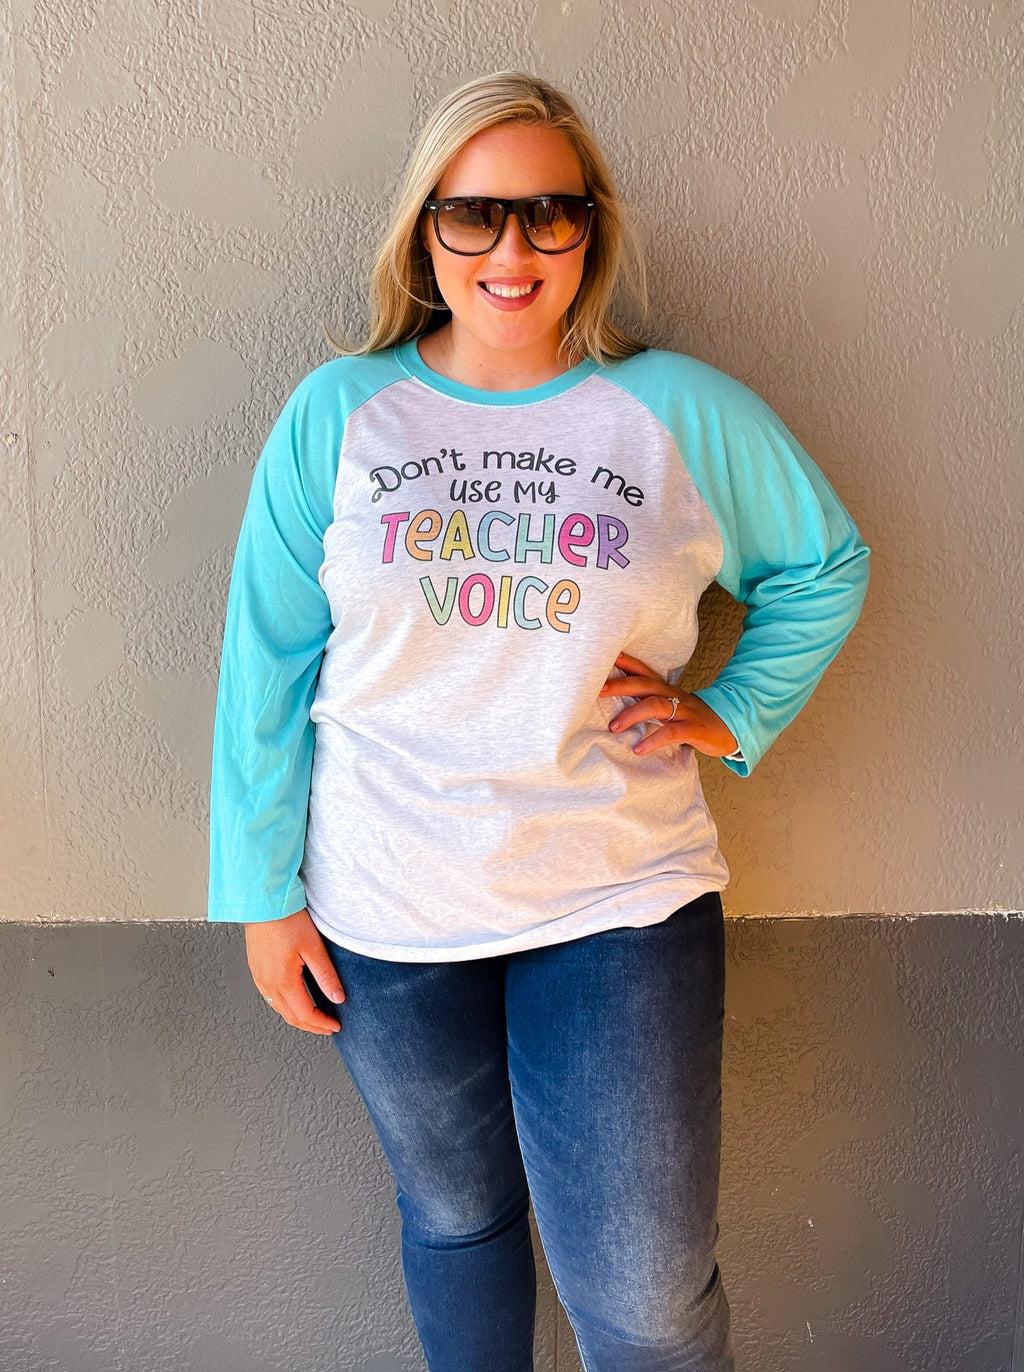 Our Don't Make Me Use My Teacher Voice Raglan is a must-have for all teachers who appreciate a good chuckle! With light blue 3/4 length sleeves and multi-colored font, this unisex fit tee is sure to make your day (or class!) more fun! So don't wait - get your teacher voice raglan now!